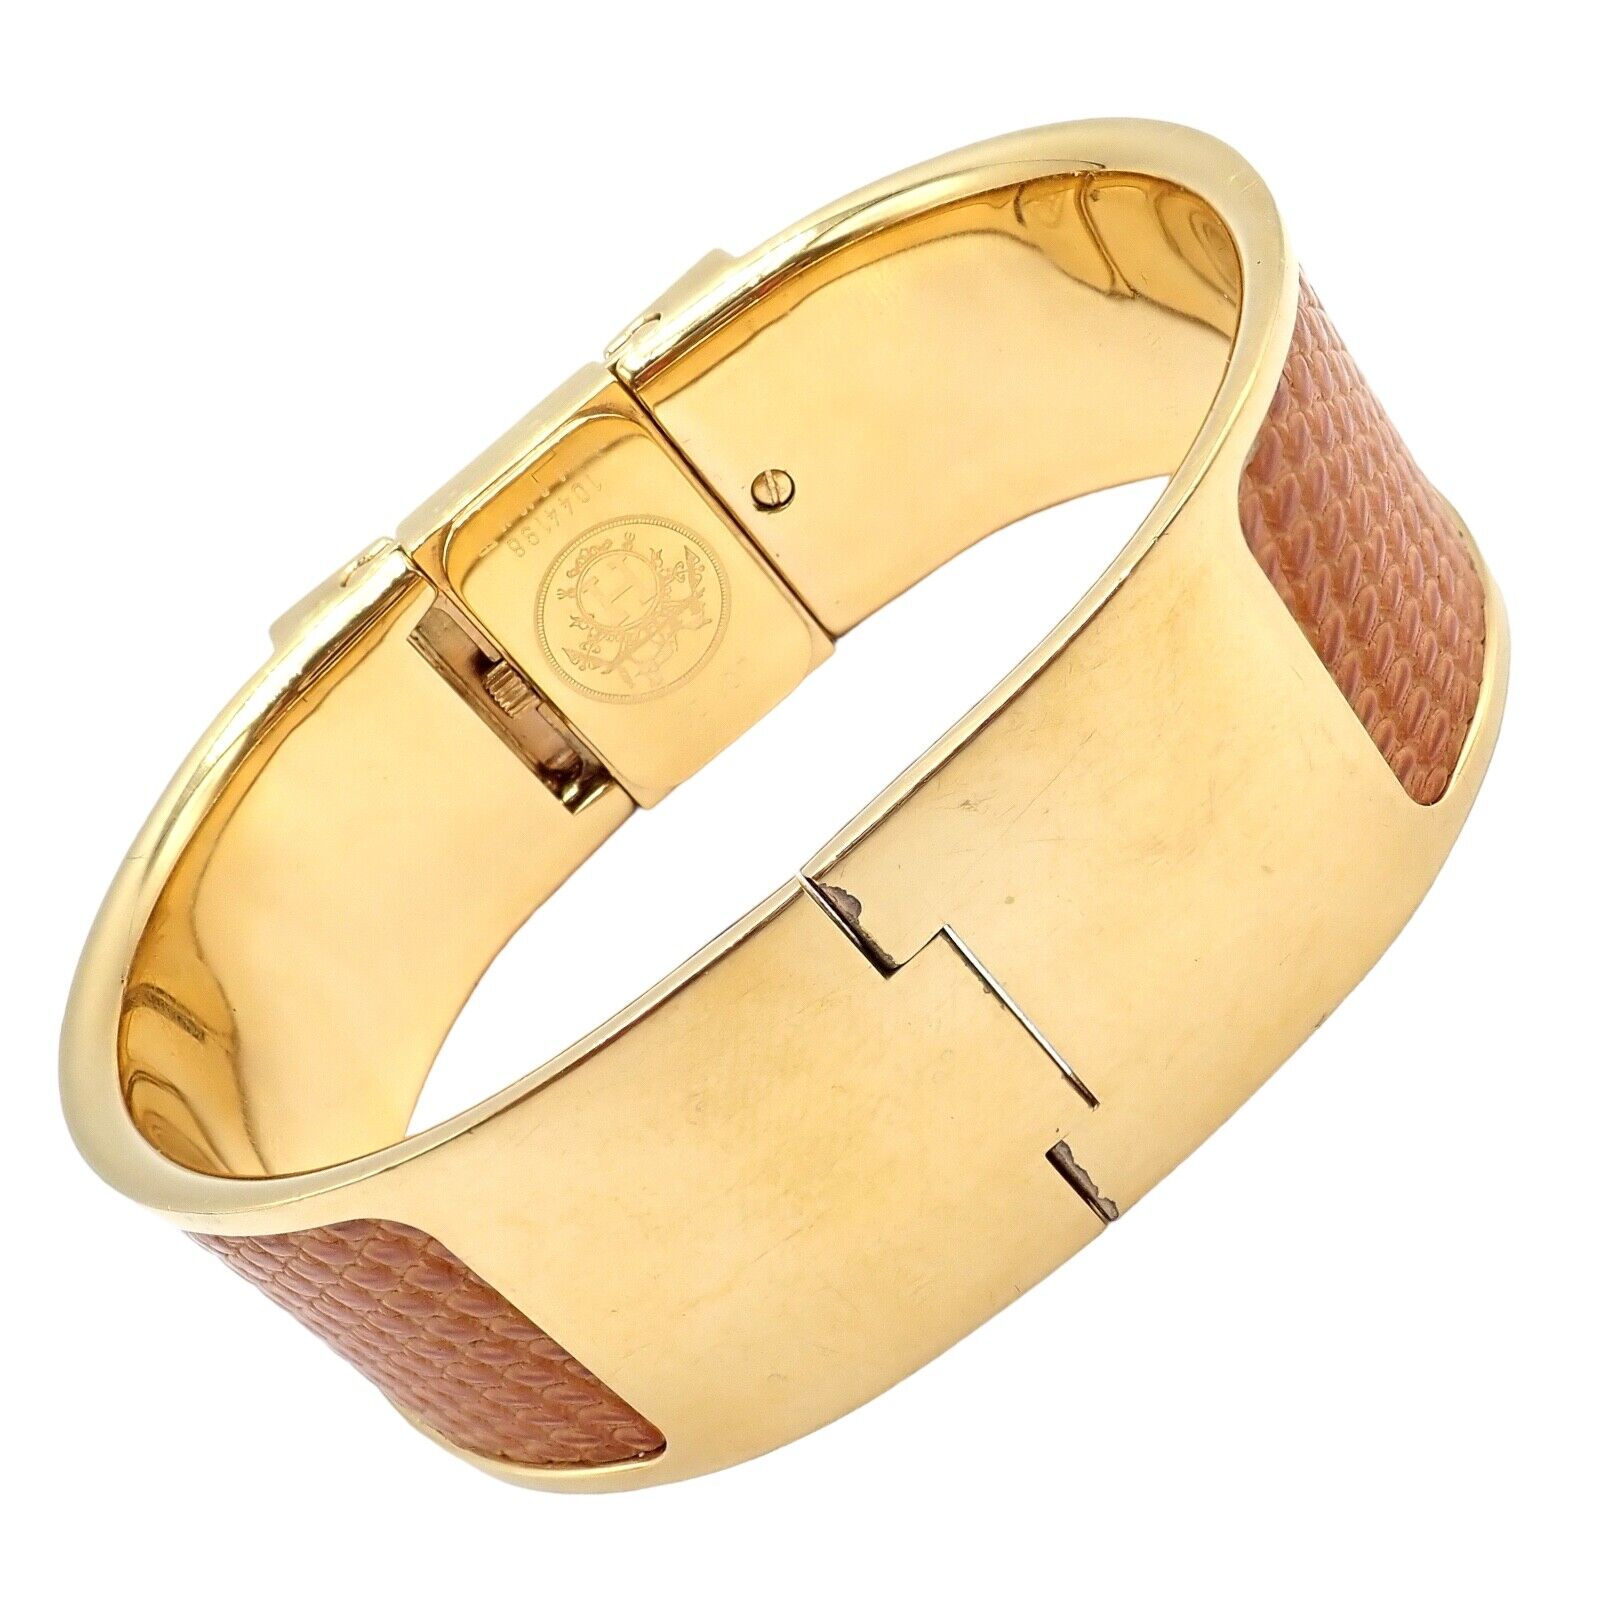 Hermes Jewelry & Watches:Watches, Parts & Accessories:Watches:Wristwatches Hermes Loquet Gold Hardware Snake Embossed Ladies Watch